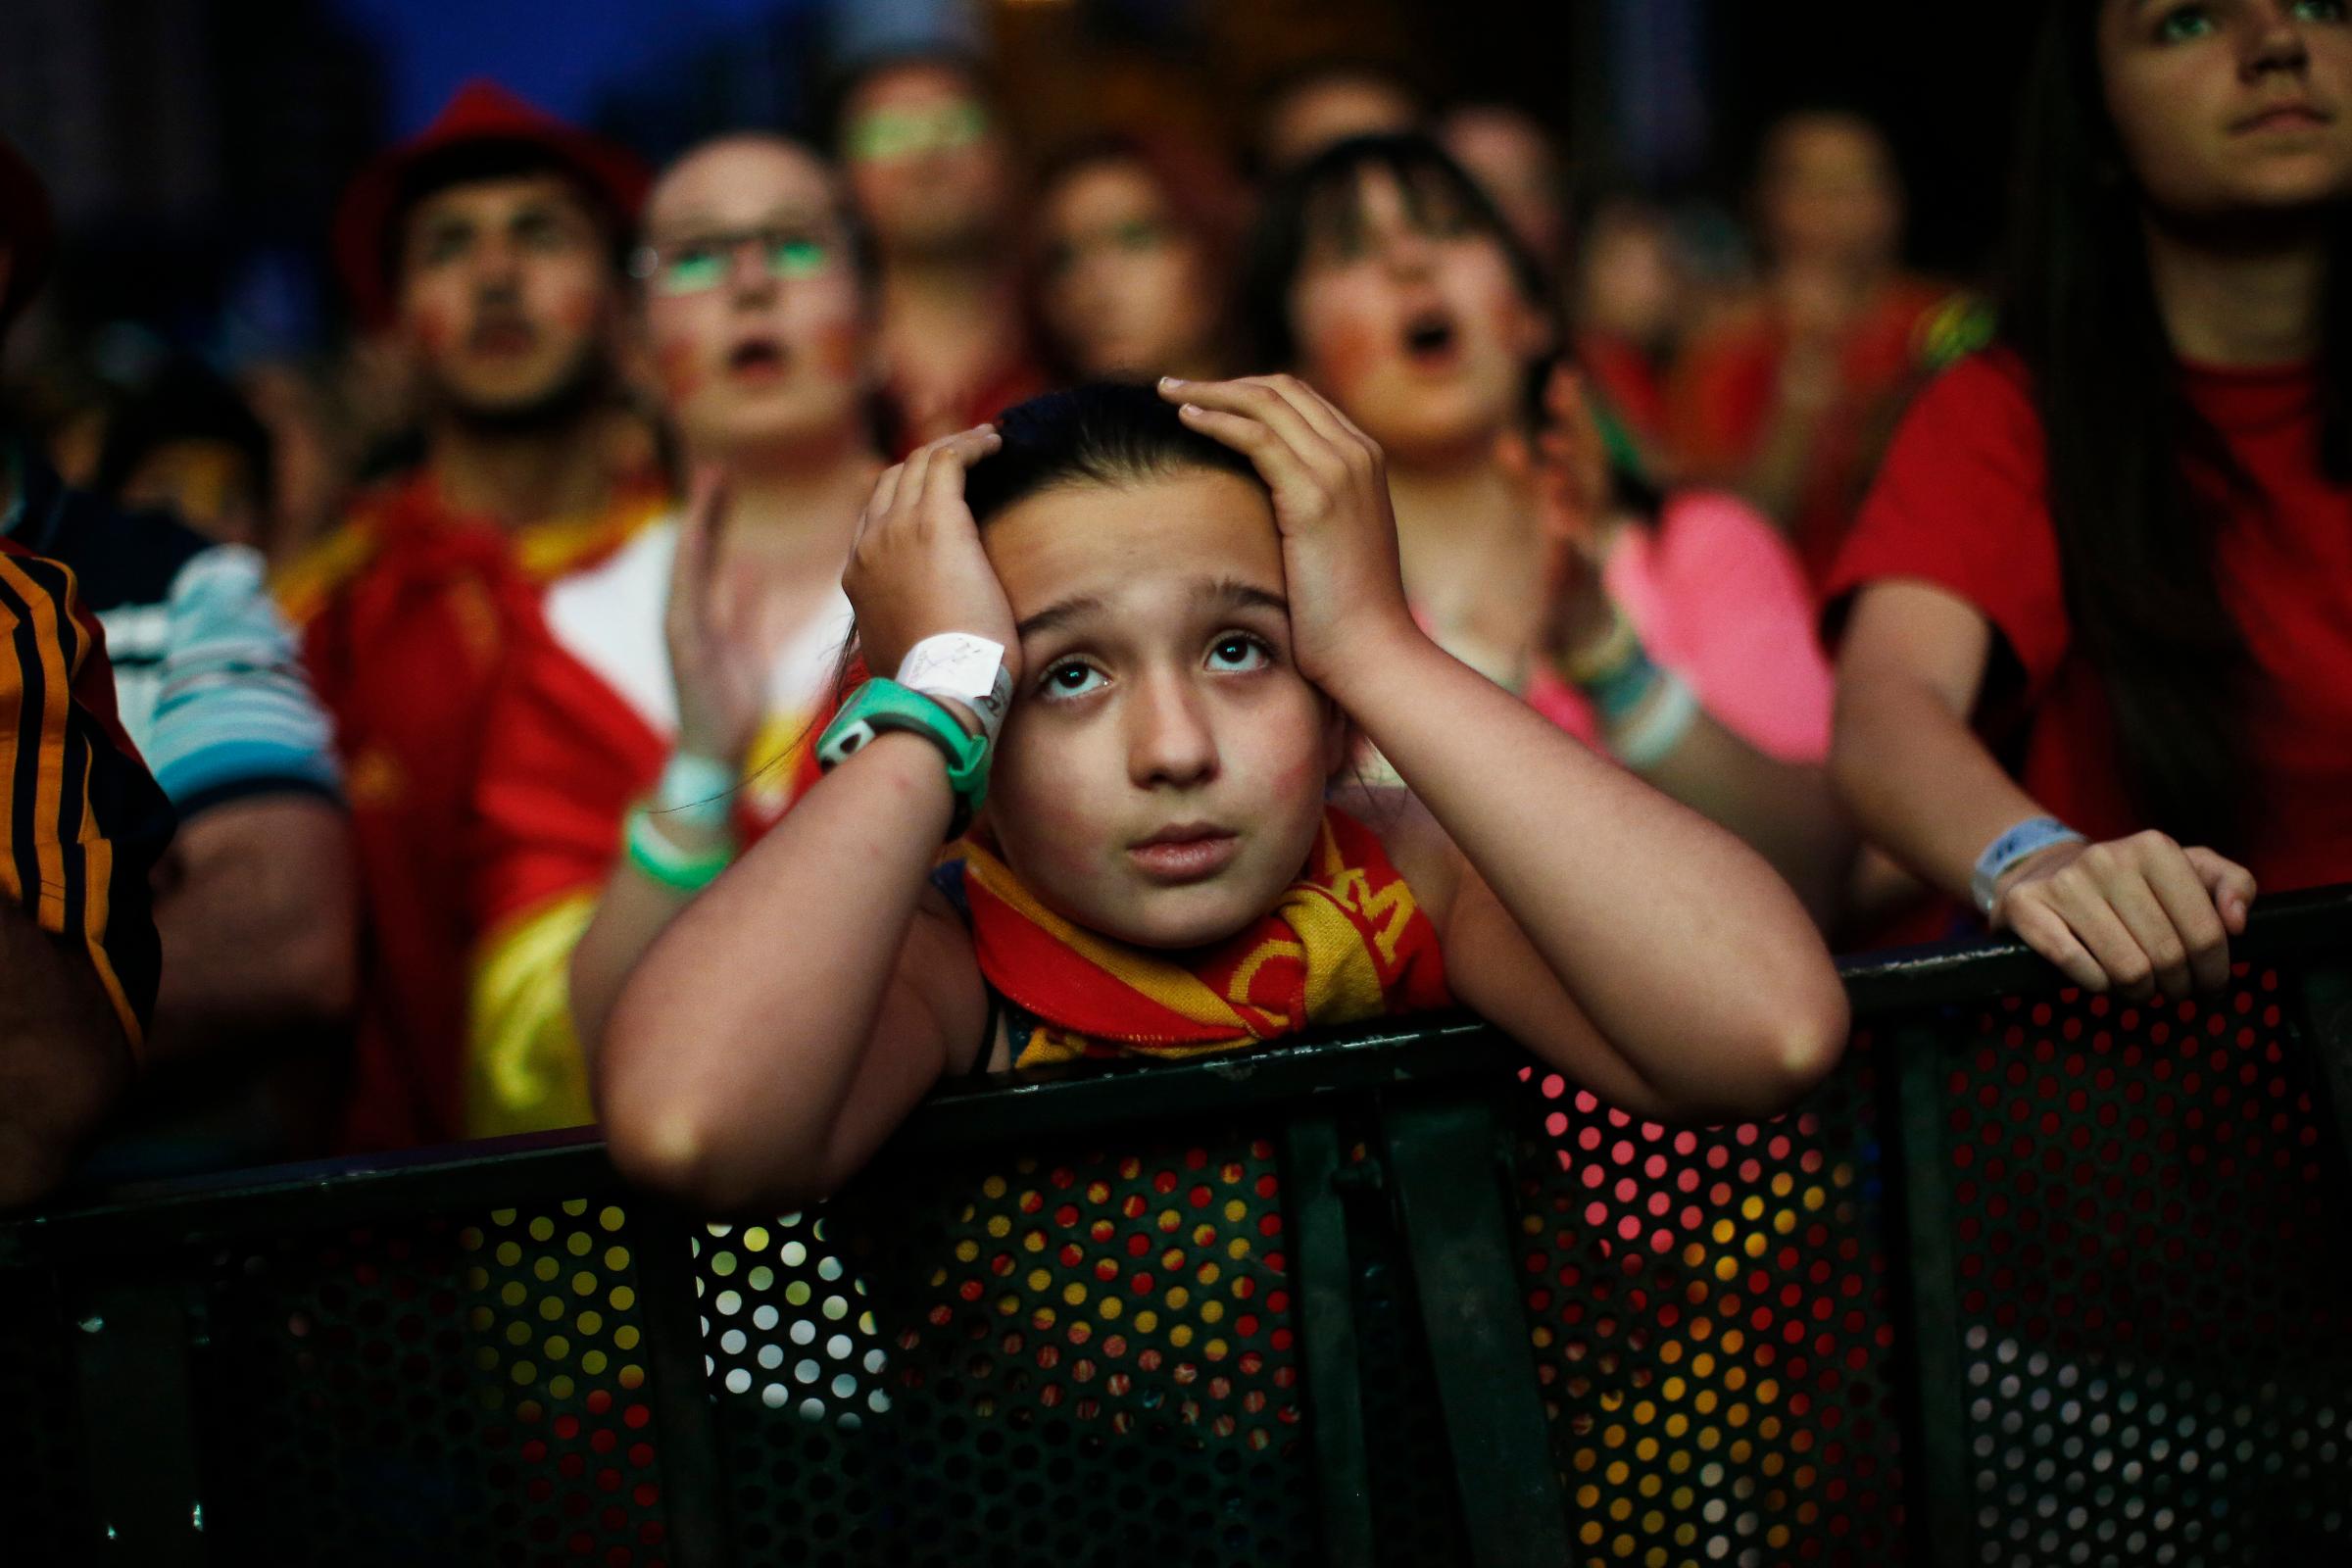 A Spanish soccer fan holds her head as she watches, on a giant display, the World Cup soccer match between Spain and Chile, in Madrid on June 18, 2014.